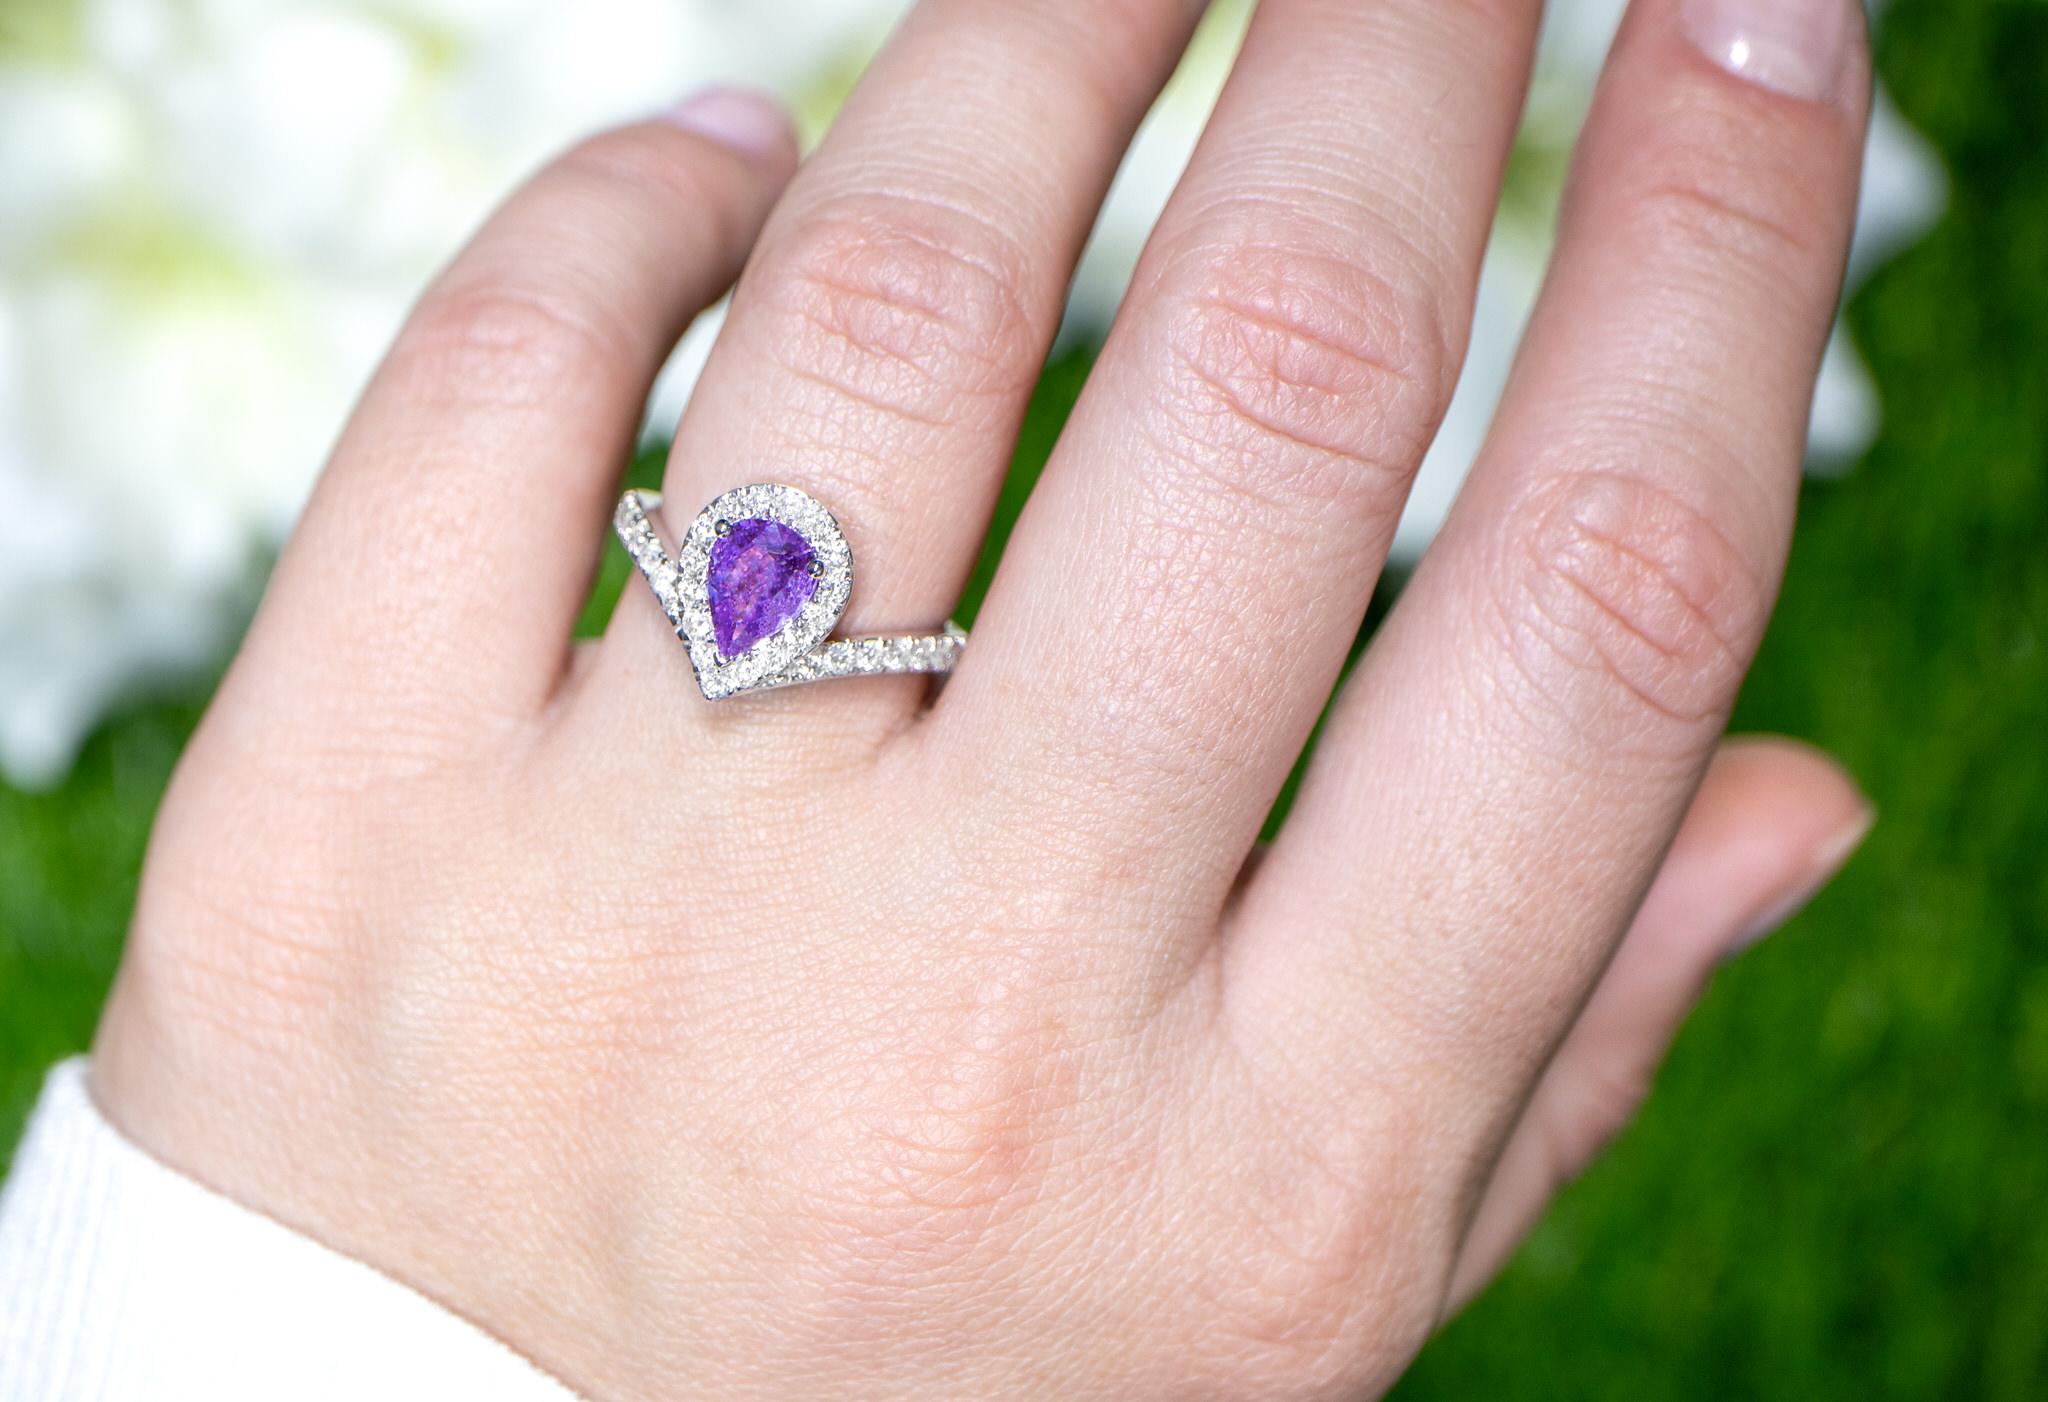 It comes with the Gemological Appraisal by GIA GG/AJP
All Gemstones are Natural
Purple Sapphire = 1.22 Carats
Diamonds = 0.56 Carats
Metal: 18K White Gold
Ring Size: 6.5* US
*It can be resized complimentary